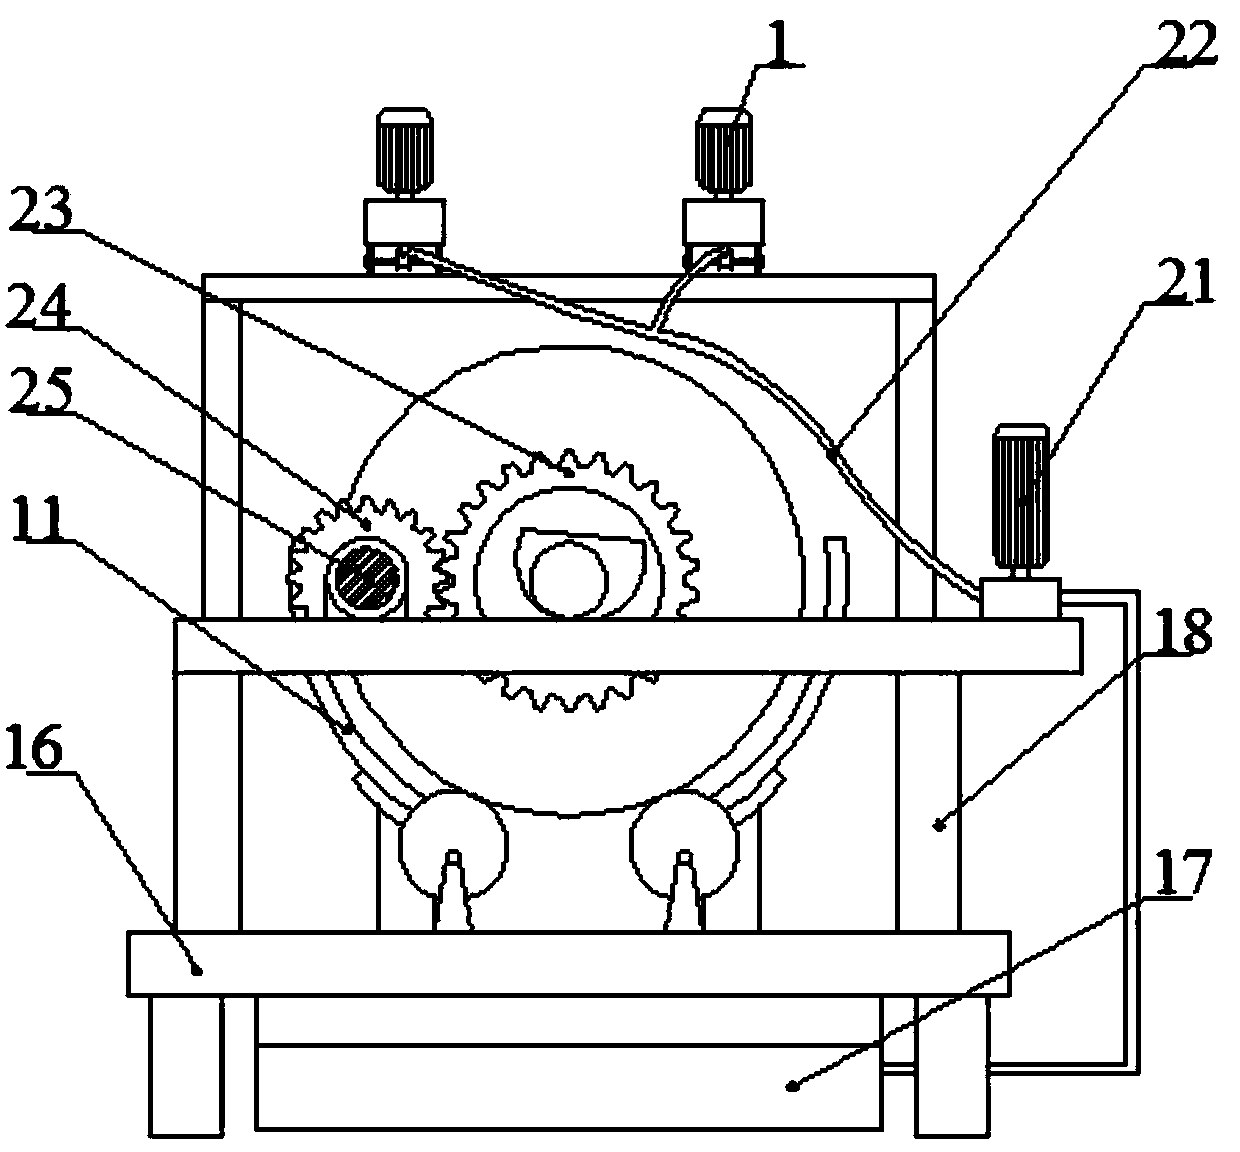 Algal water filtering apparatus capable of realizing water anchor point type algae suction